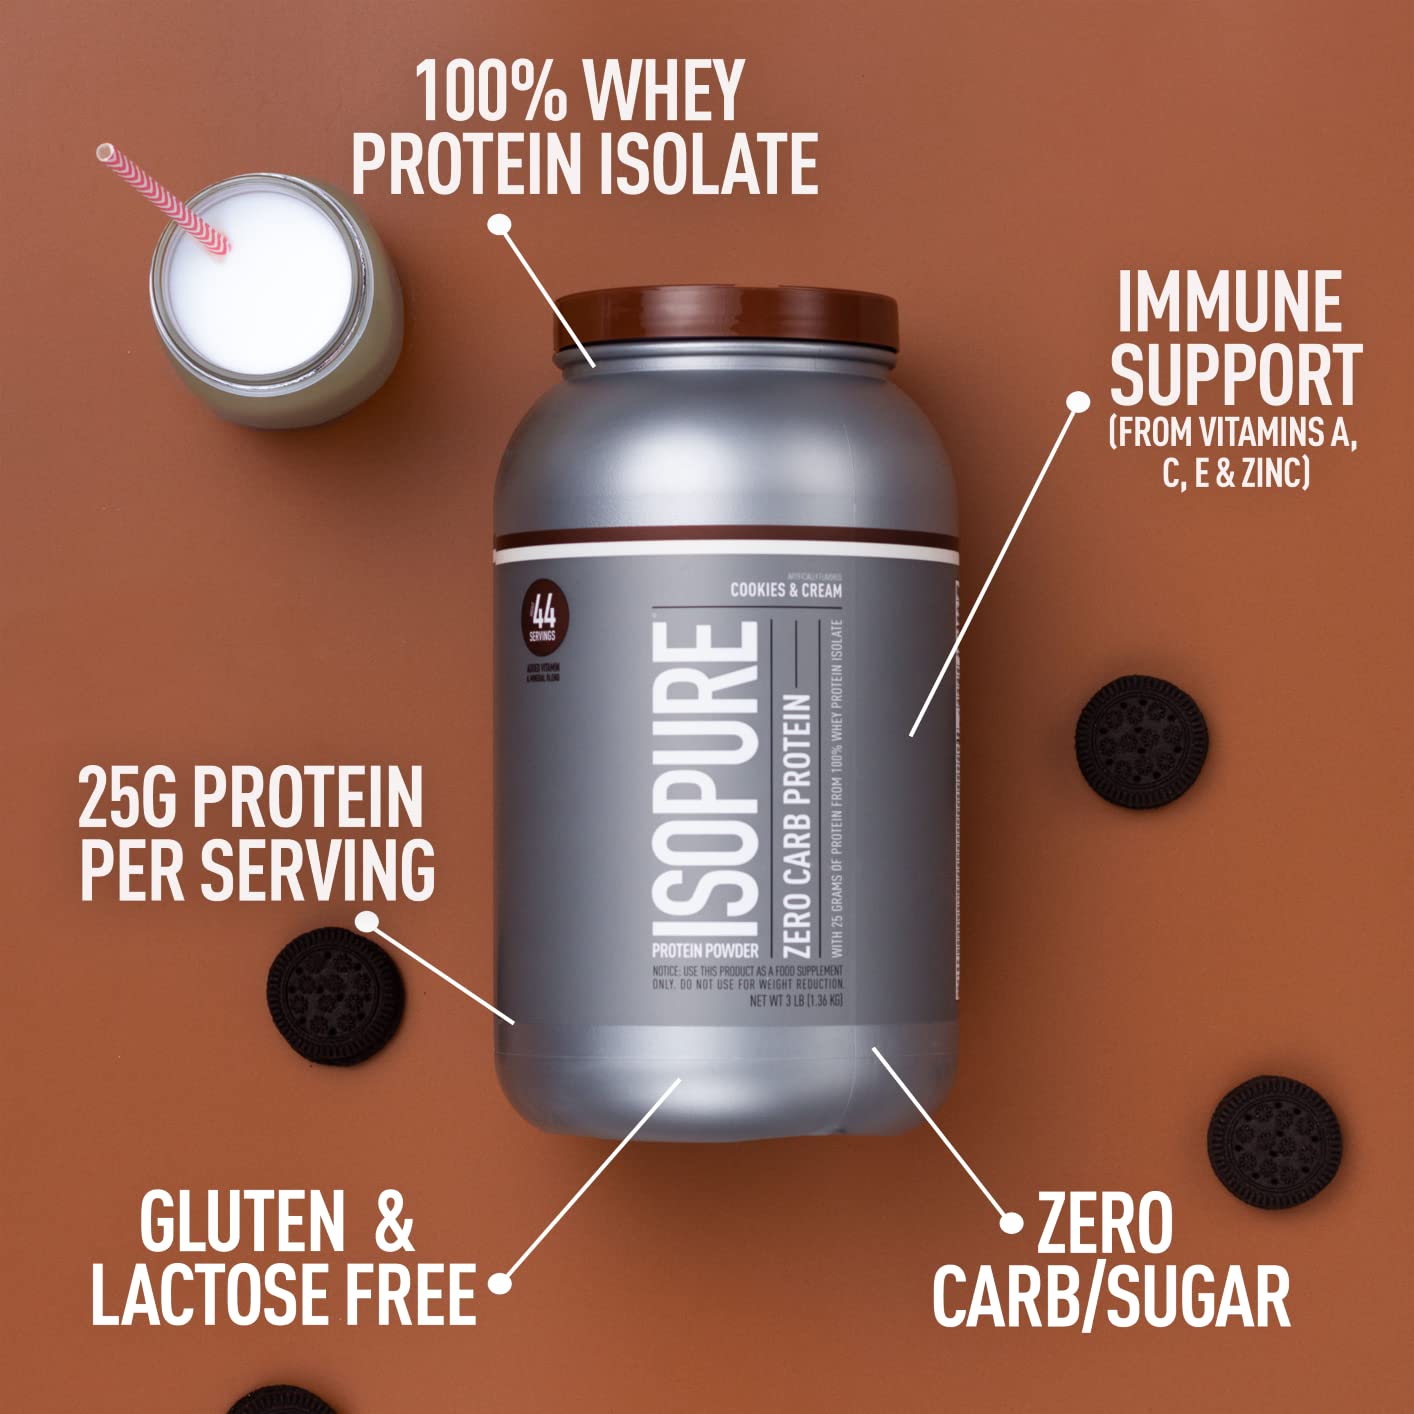 Isopure Zero Carb, Vitamin C and Zinc for Immune Support, 25g Protein, Keto Friendly Protein Powder, 100% Whey Protein Isolate, Flavor: Cookies & Cream, 1 Pound (Packaging May Vary) (Pack of 5)